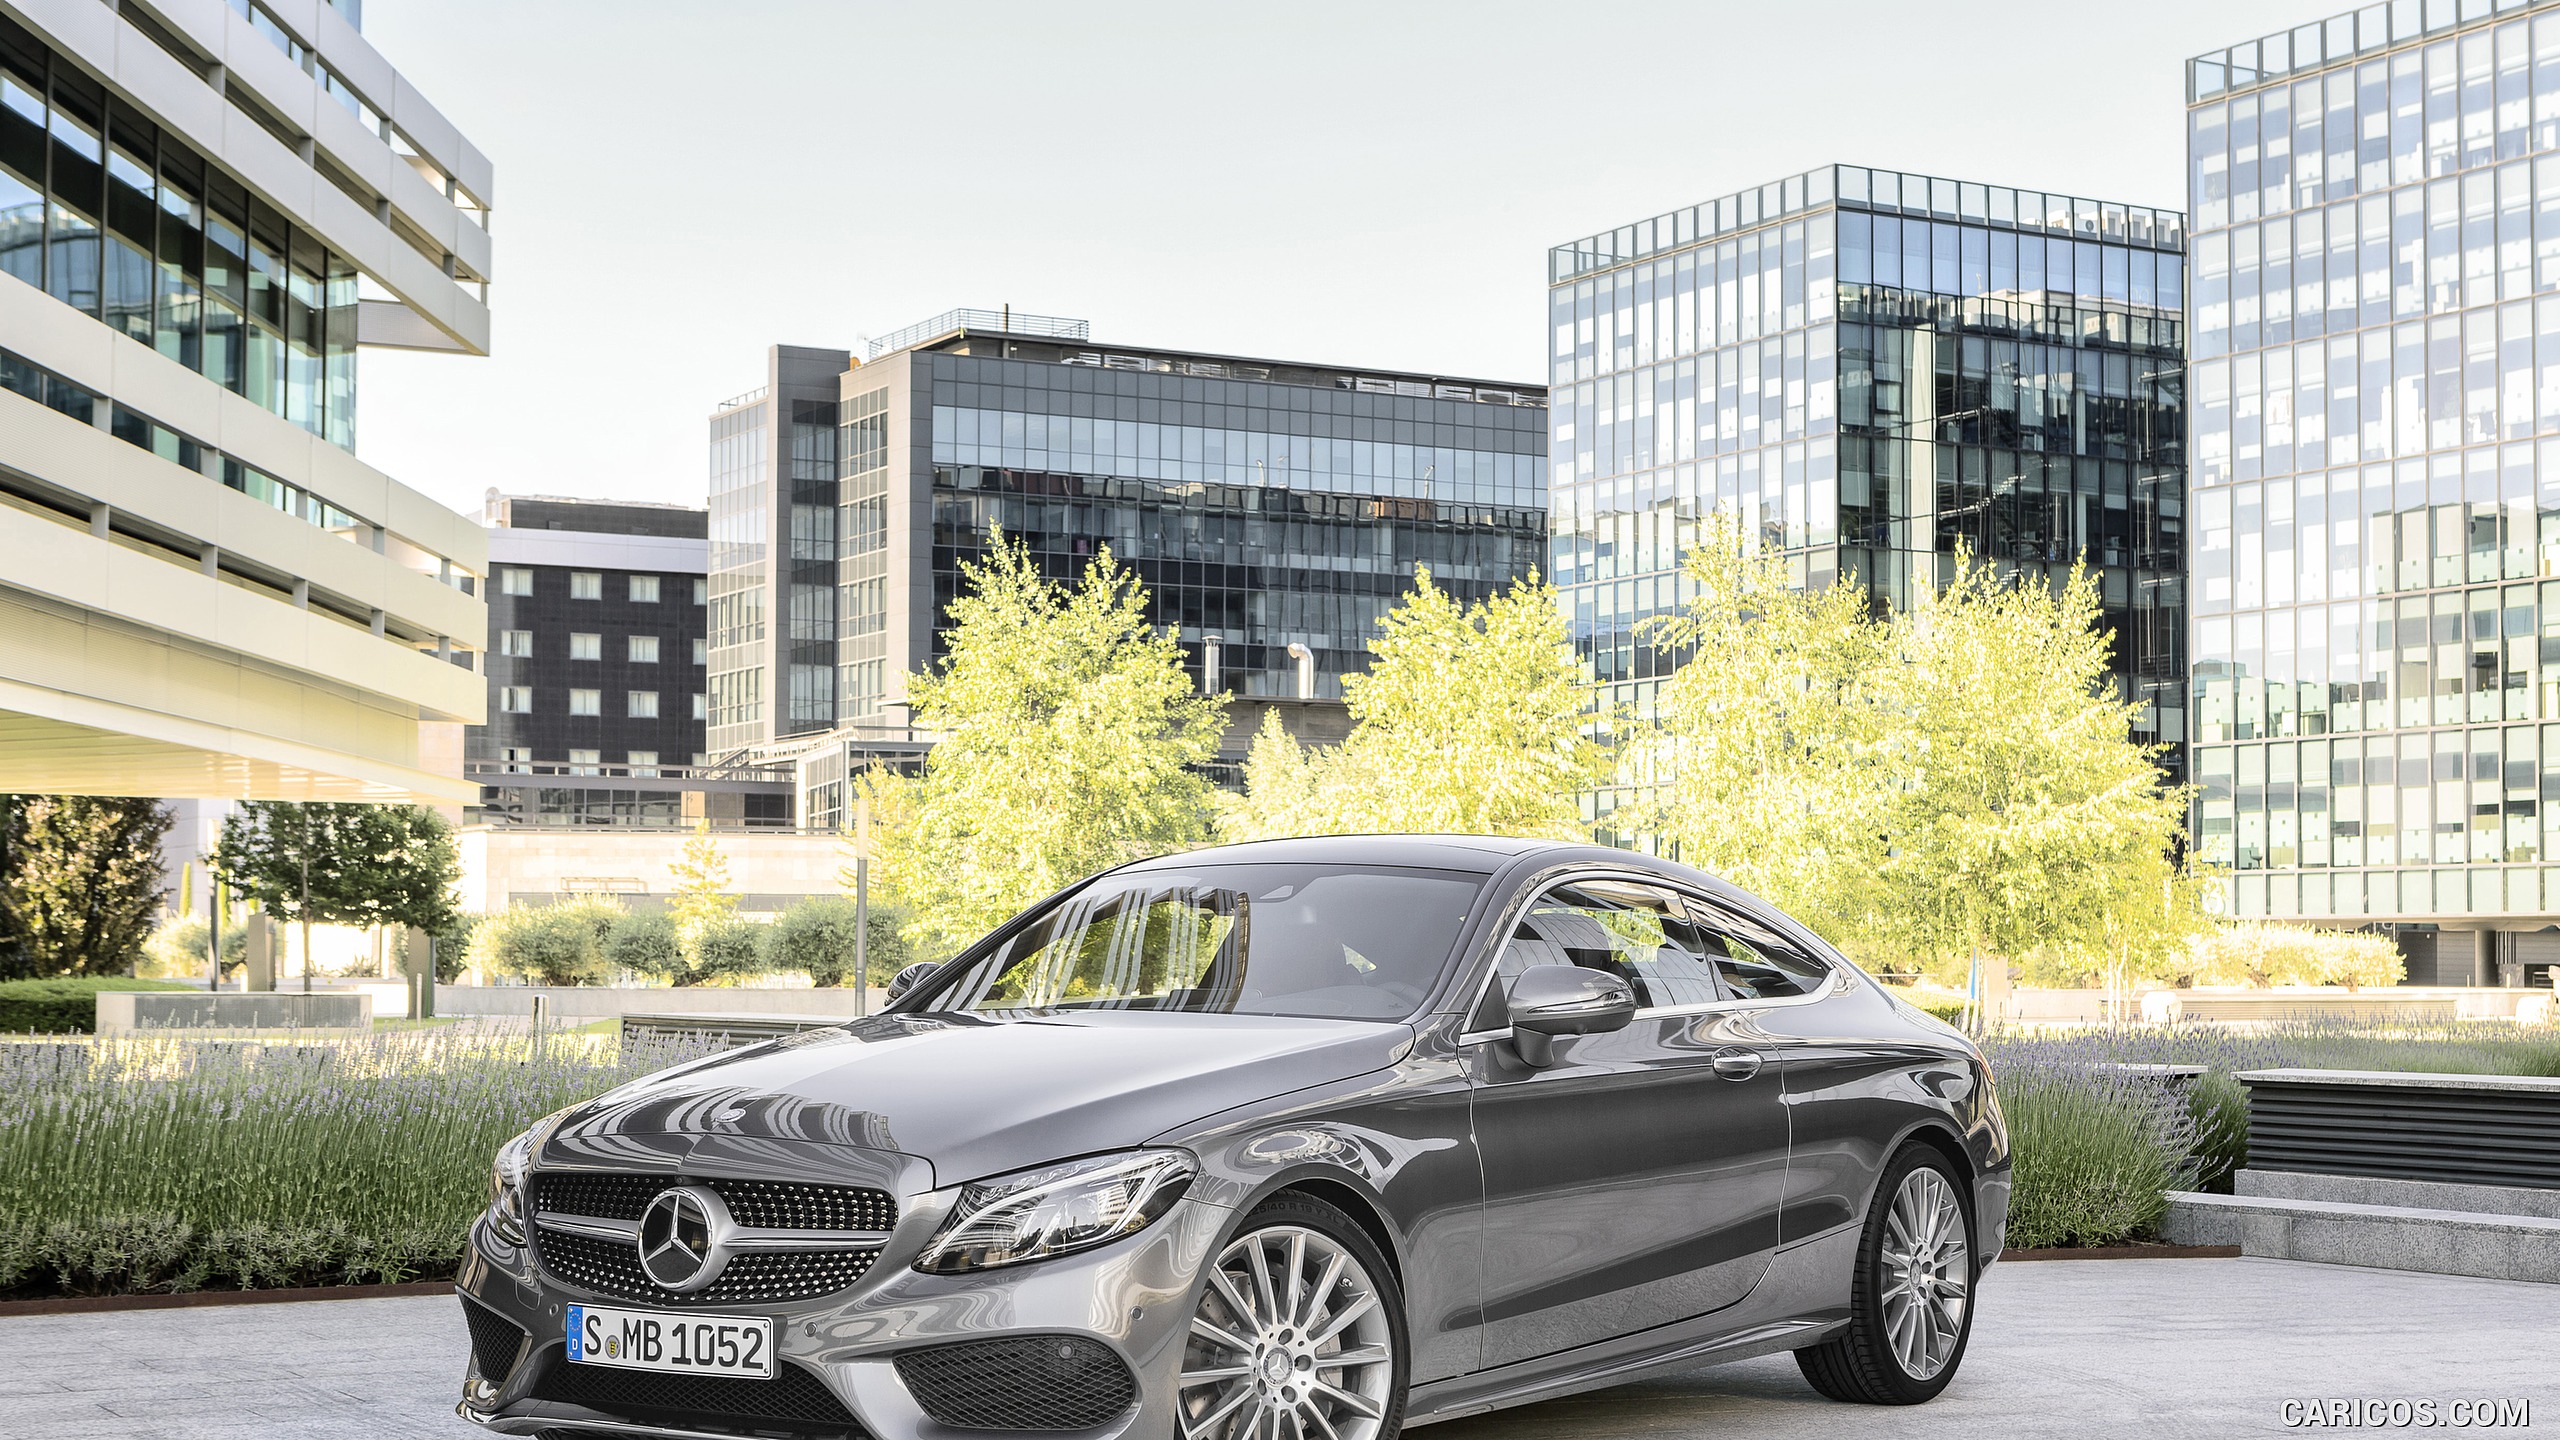 2017 Mercedes-Benz C-Class Coupe C300 (Selenit Grey) - Front, #52 of 210